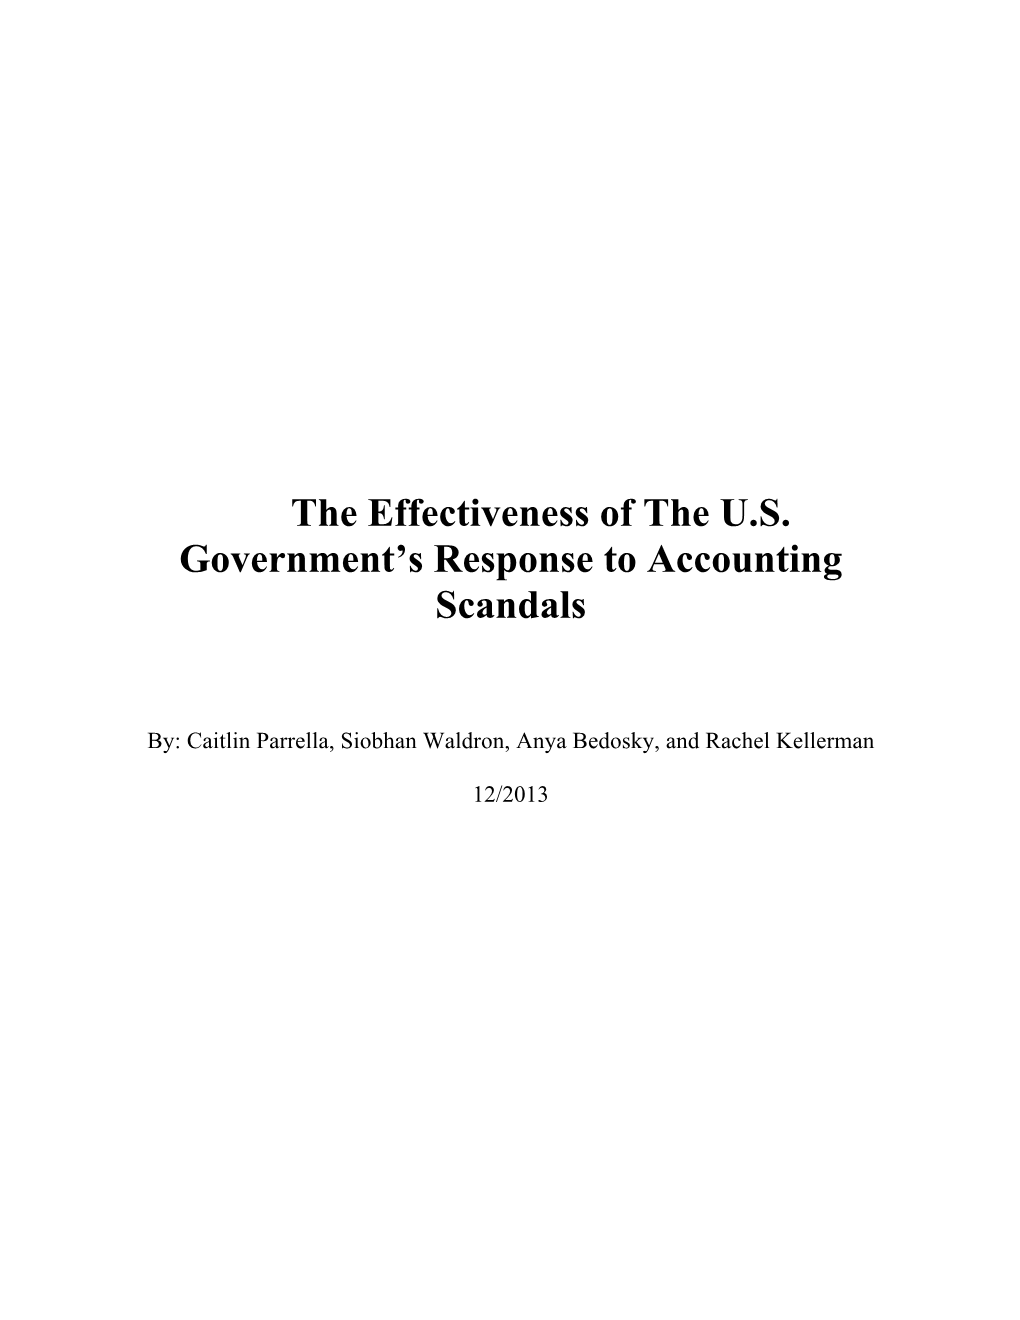 The Effectiveness of the U.S. Government's Response To